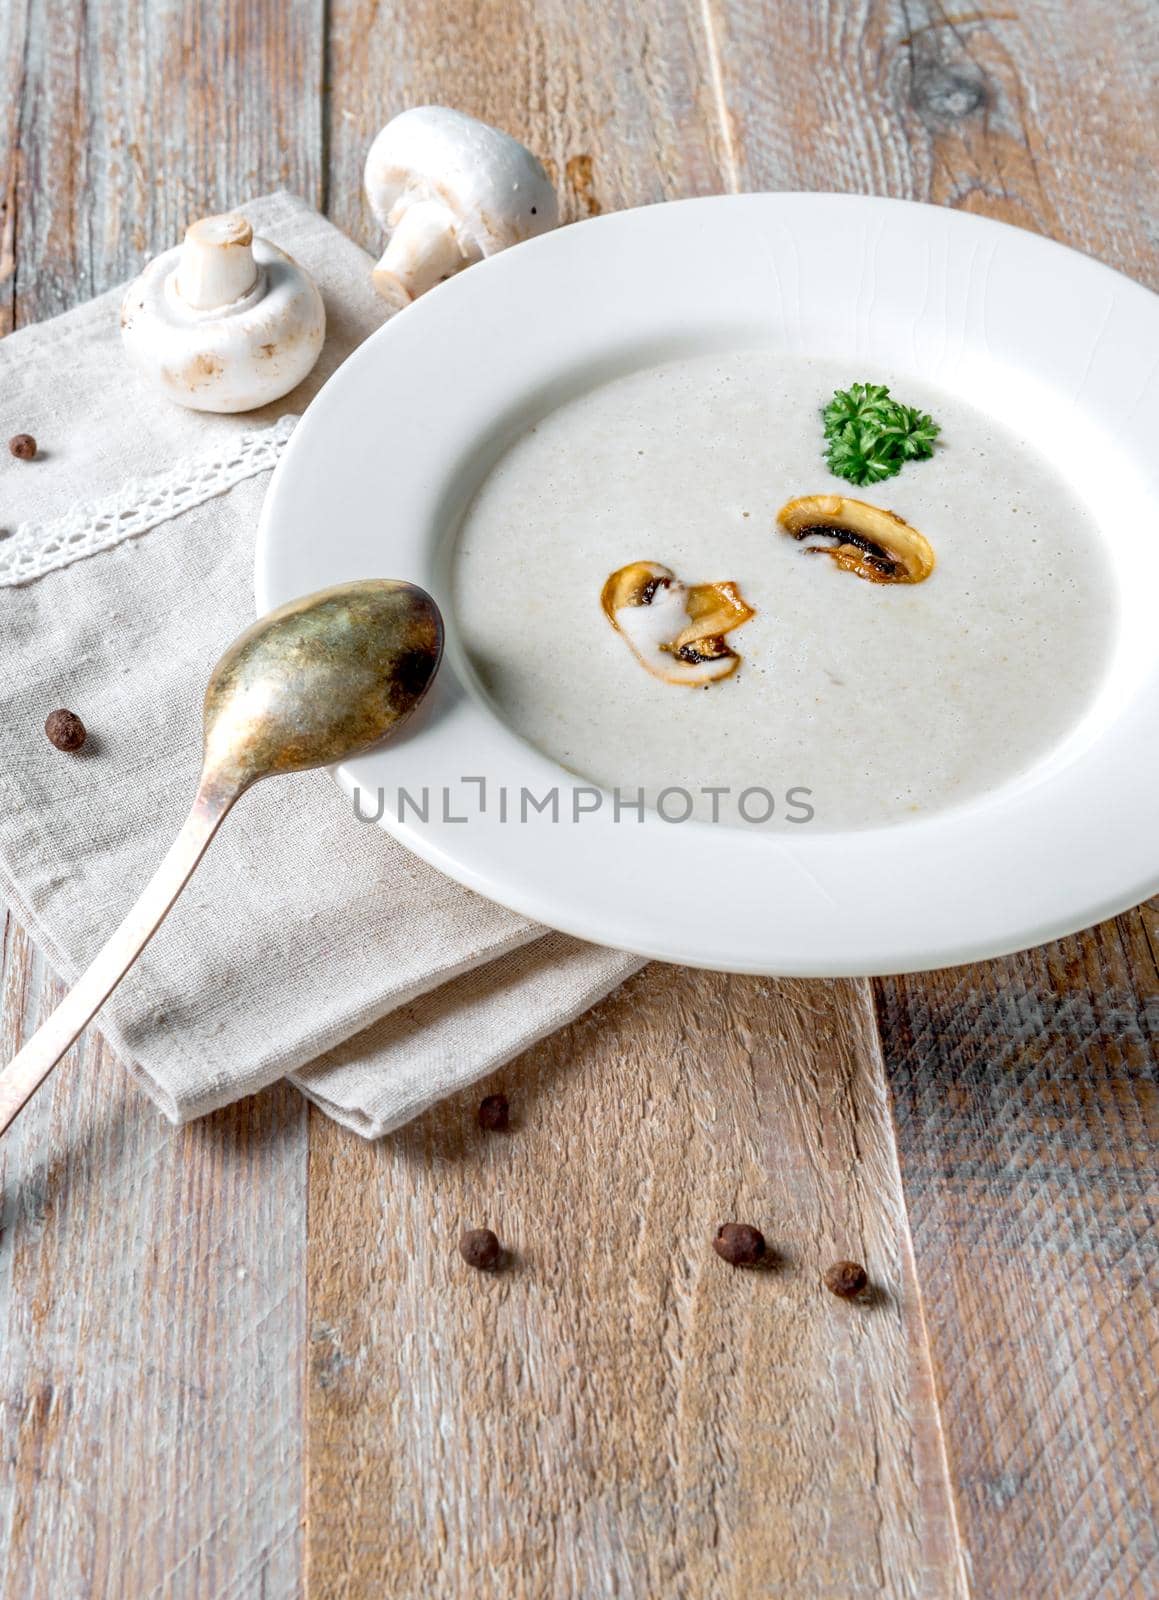 Delicious creamy mushroom soup with some pieces of mushrooms in it, old spoon and napkin